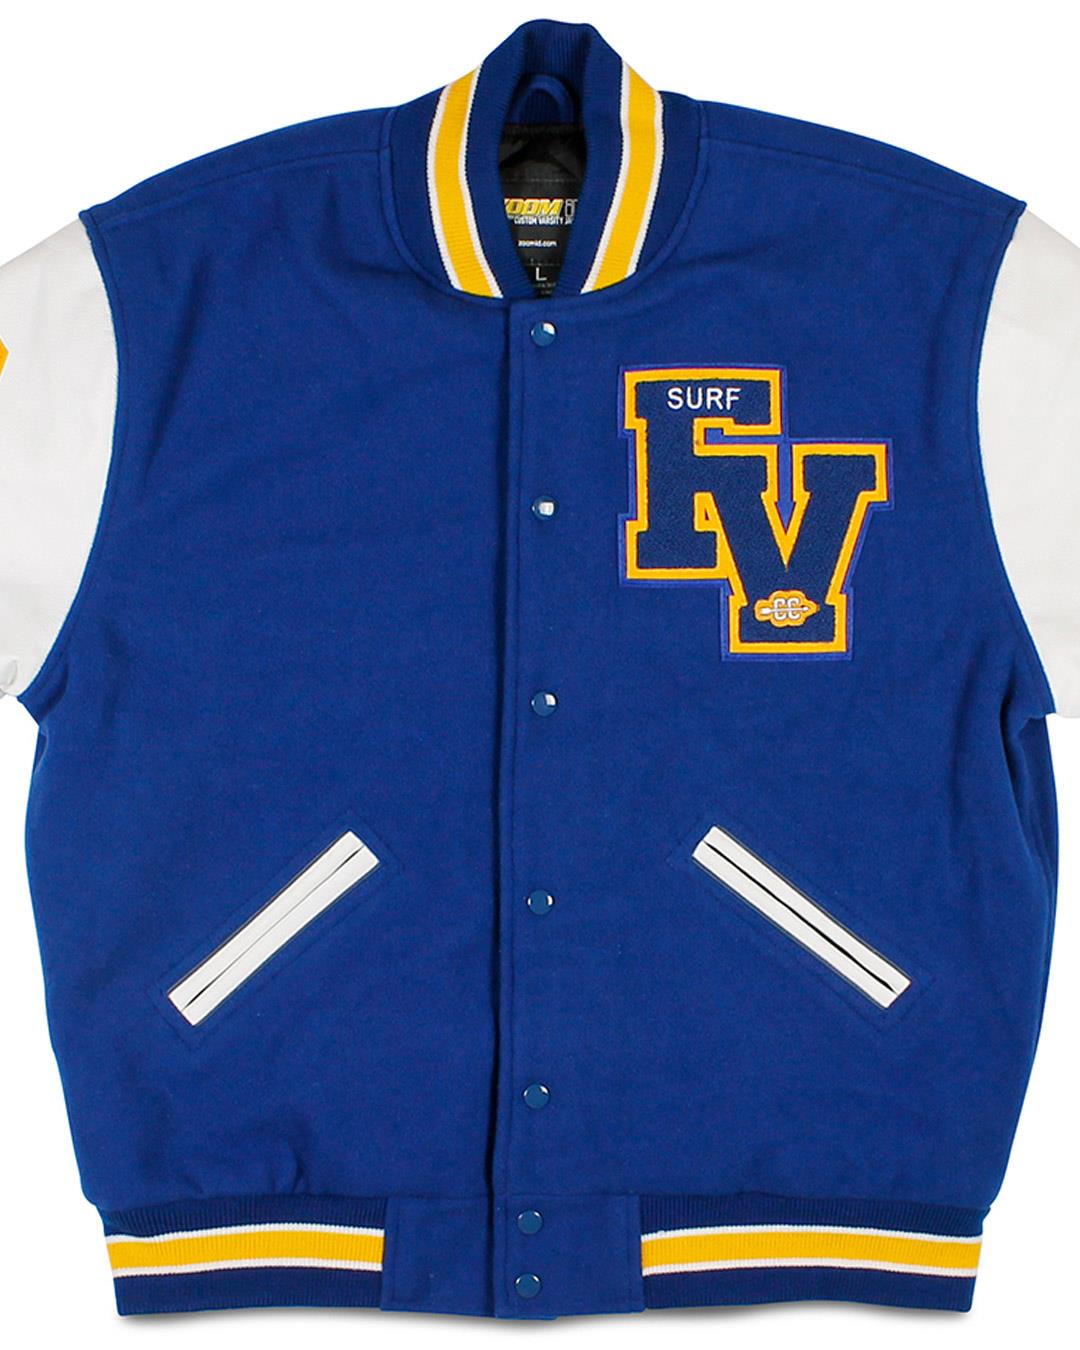 Fountain Valley High School Letterman Jacket, Fountain Valley CA - Front